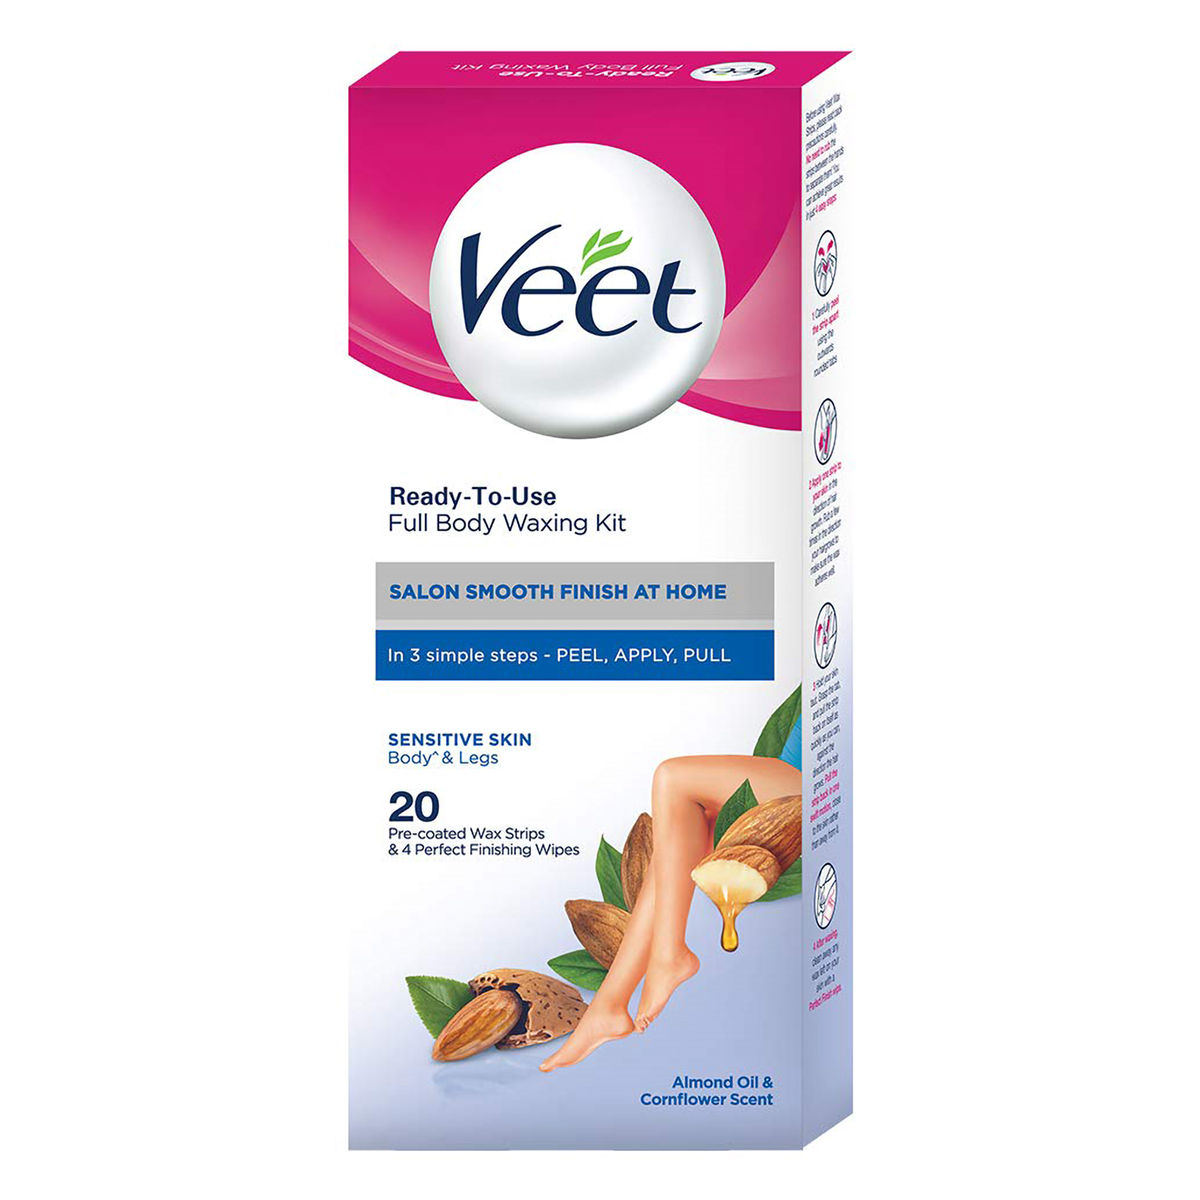 Buy Veet Ready to Use Wax Strips Full Body Waxing Kit for Sensitive Skin, 20 Count Online